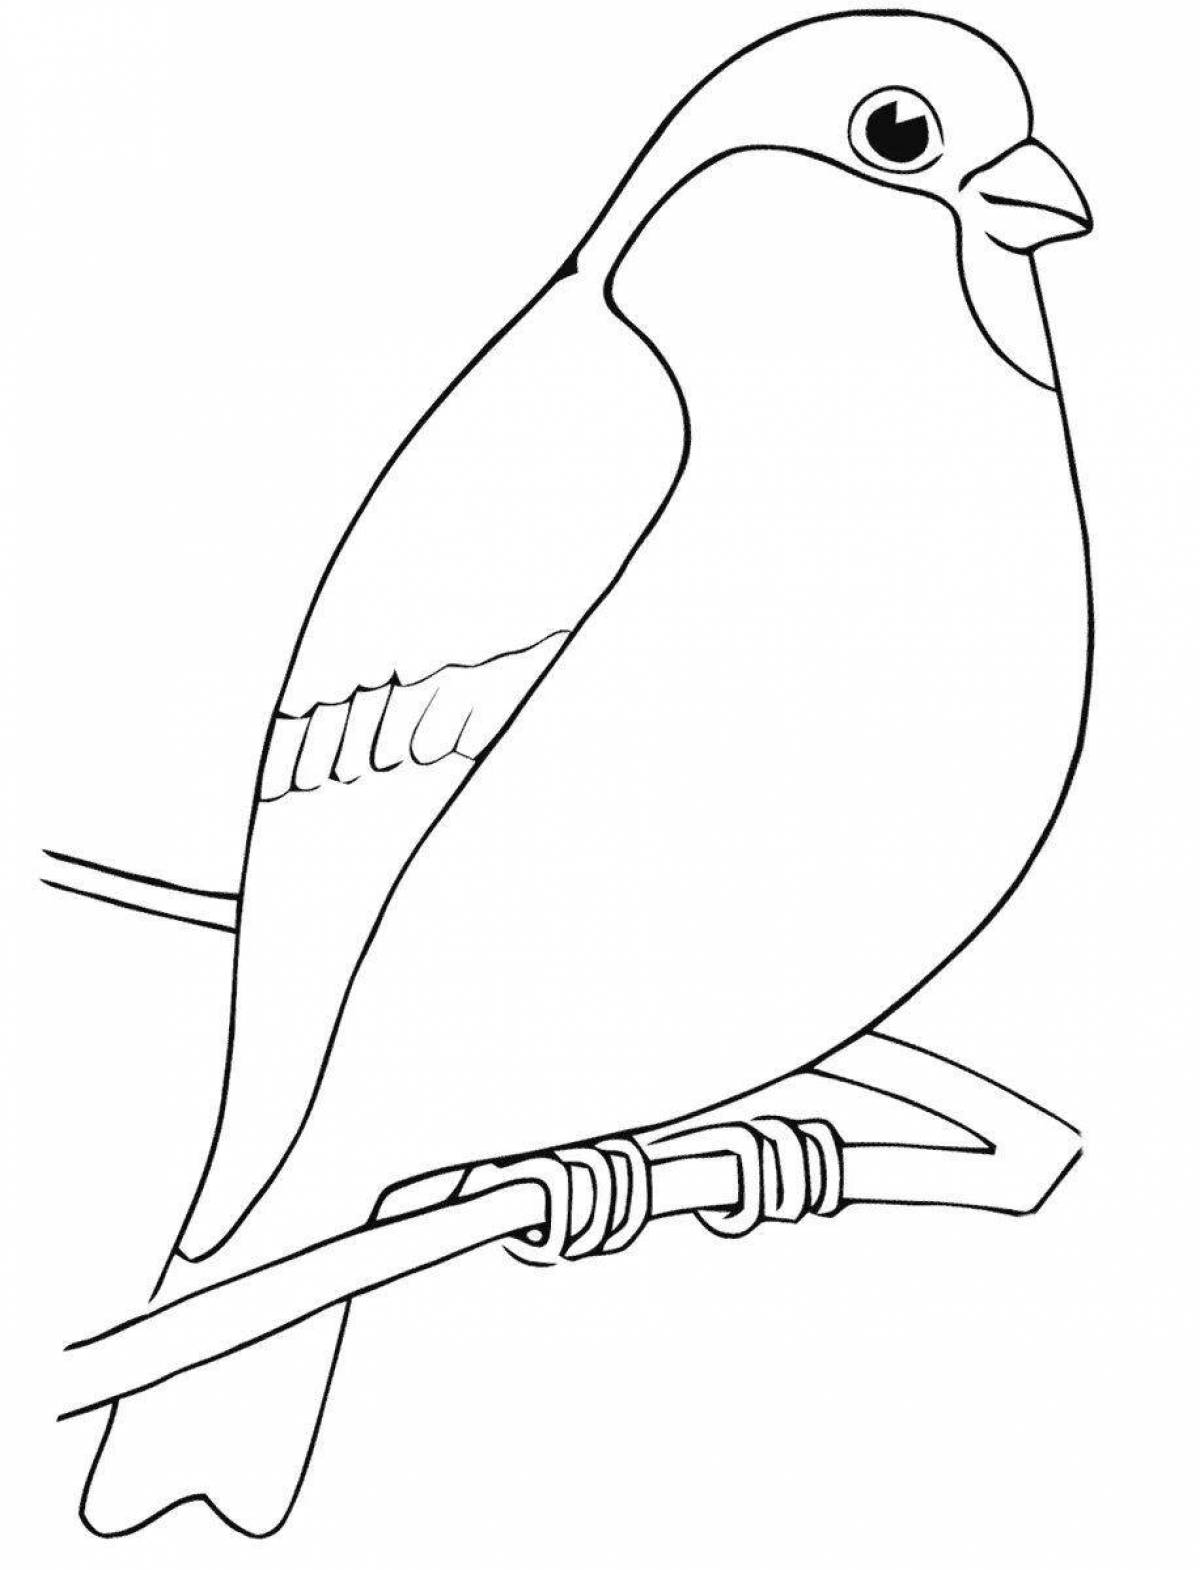 A bullfinch coloring book for kids